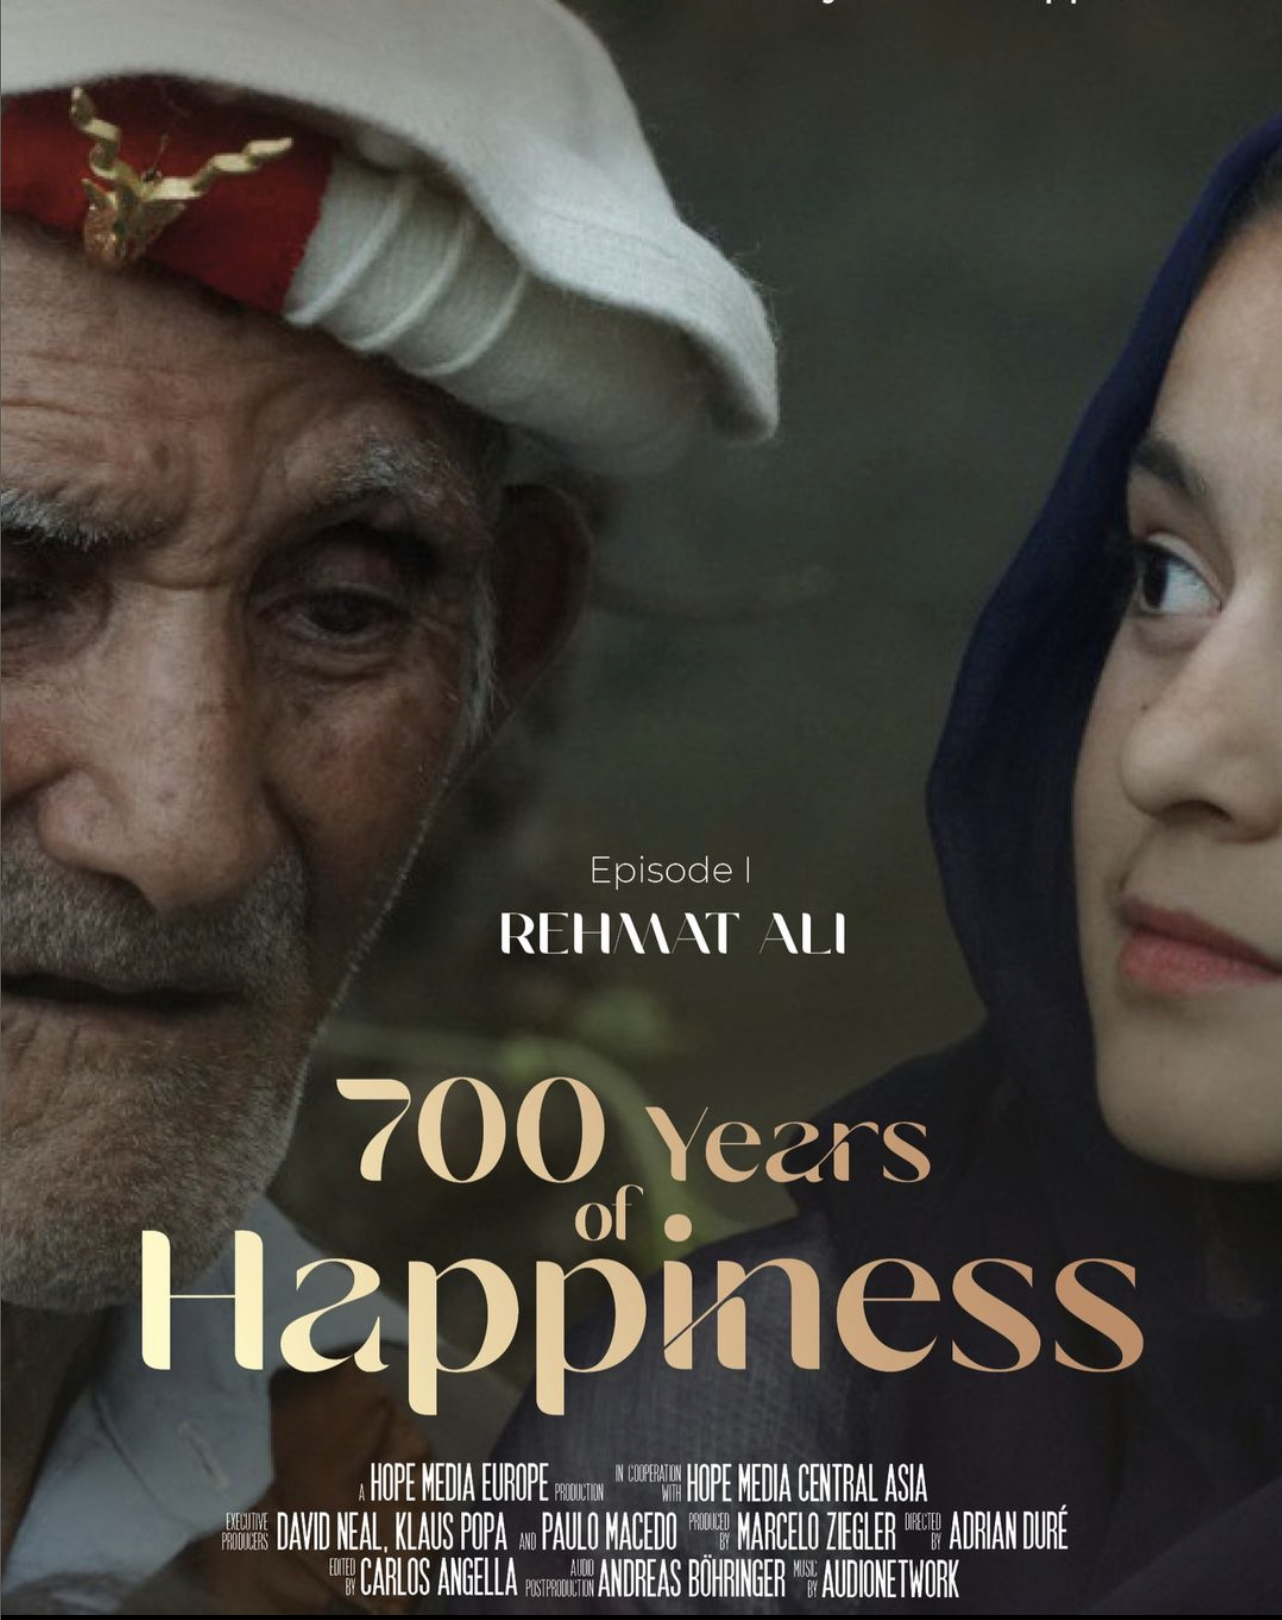 Happiness project 700 years of Happiness series on centenarians